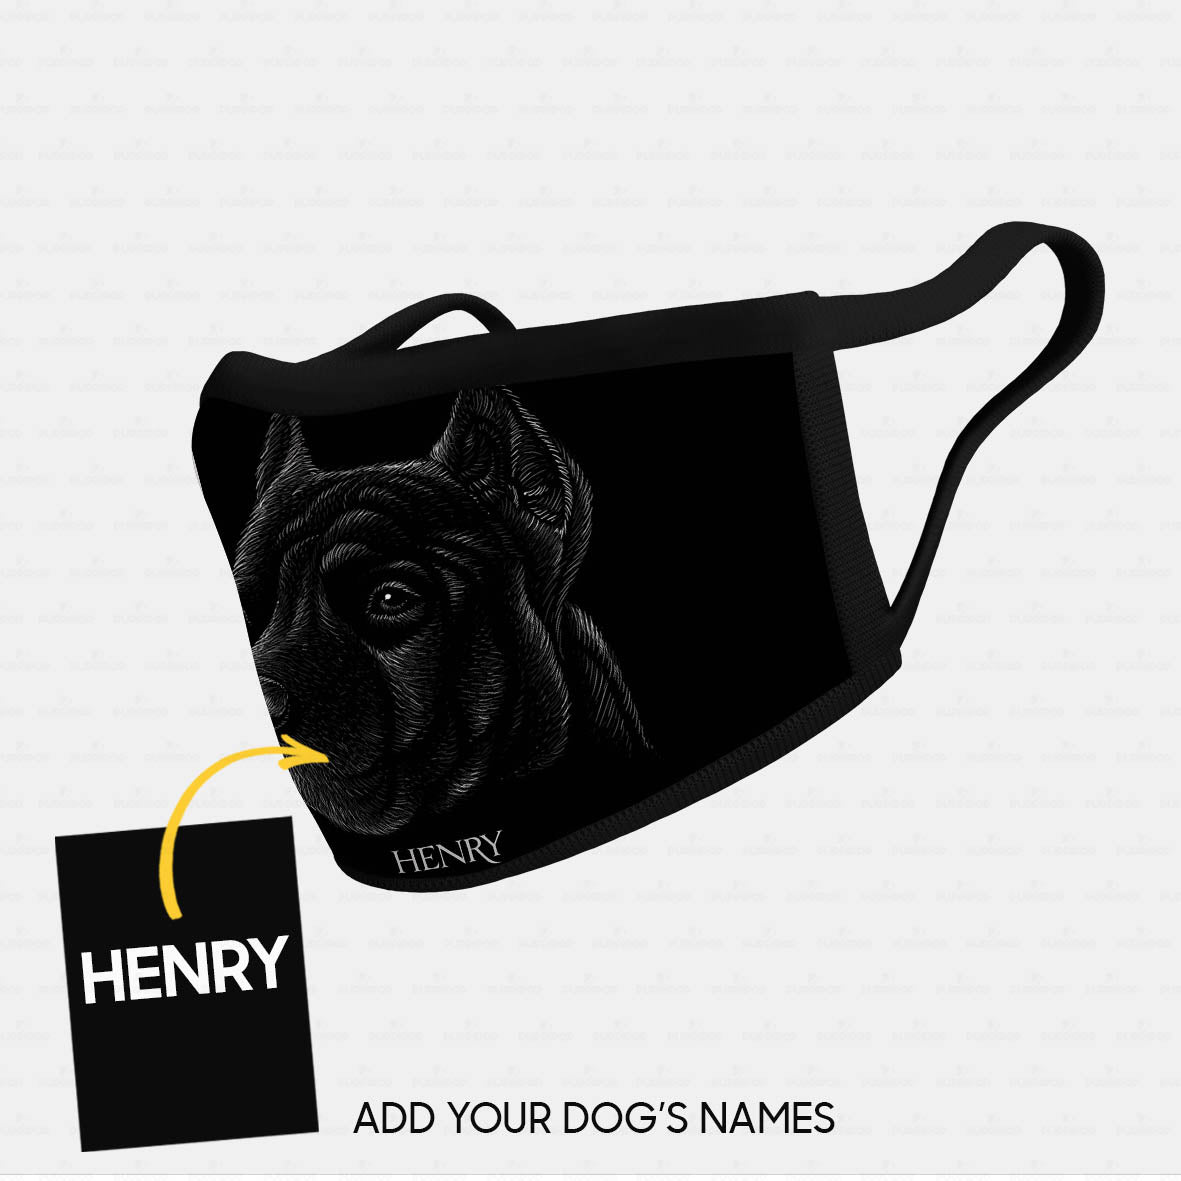 Personalized Dog Gift Idea - All Black Dog With Short Ears For Dog Lovers - Cloth Mask